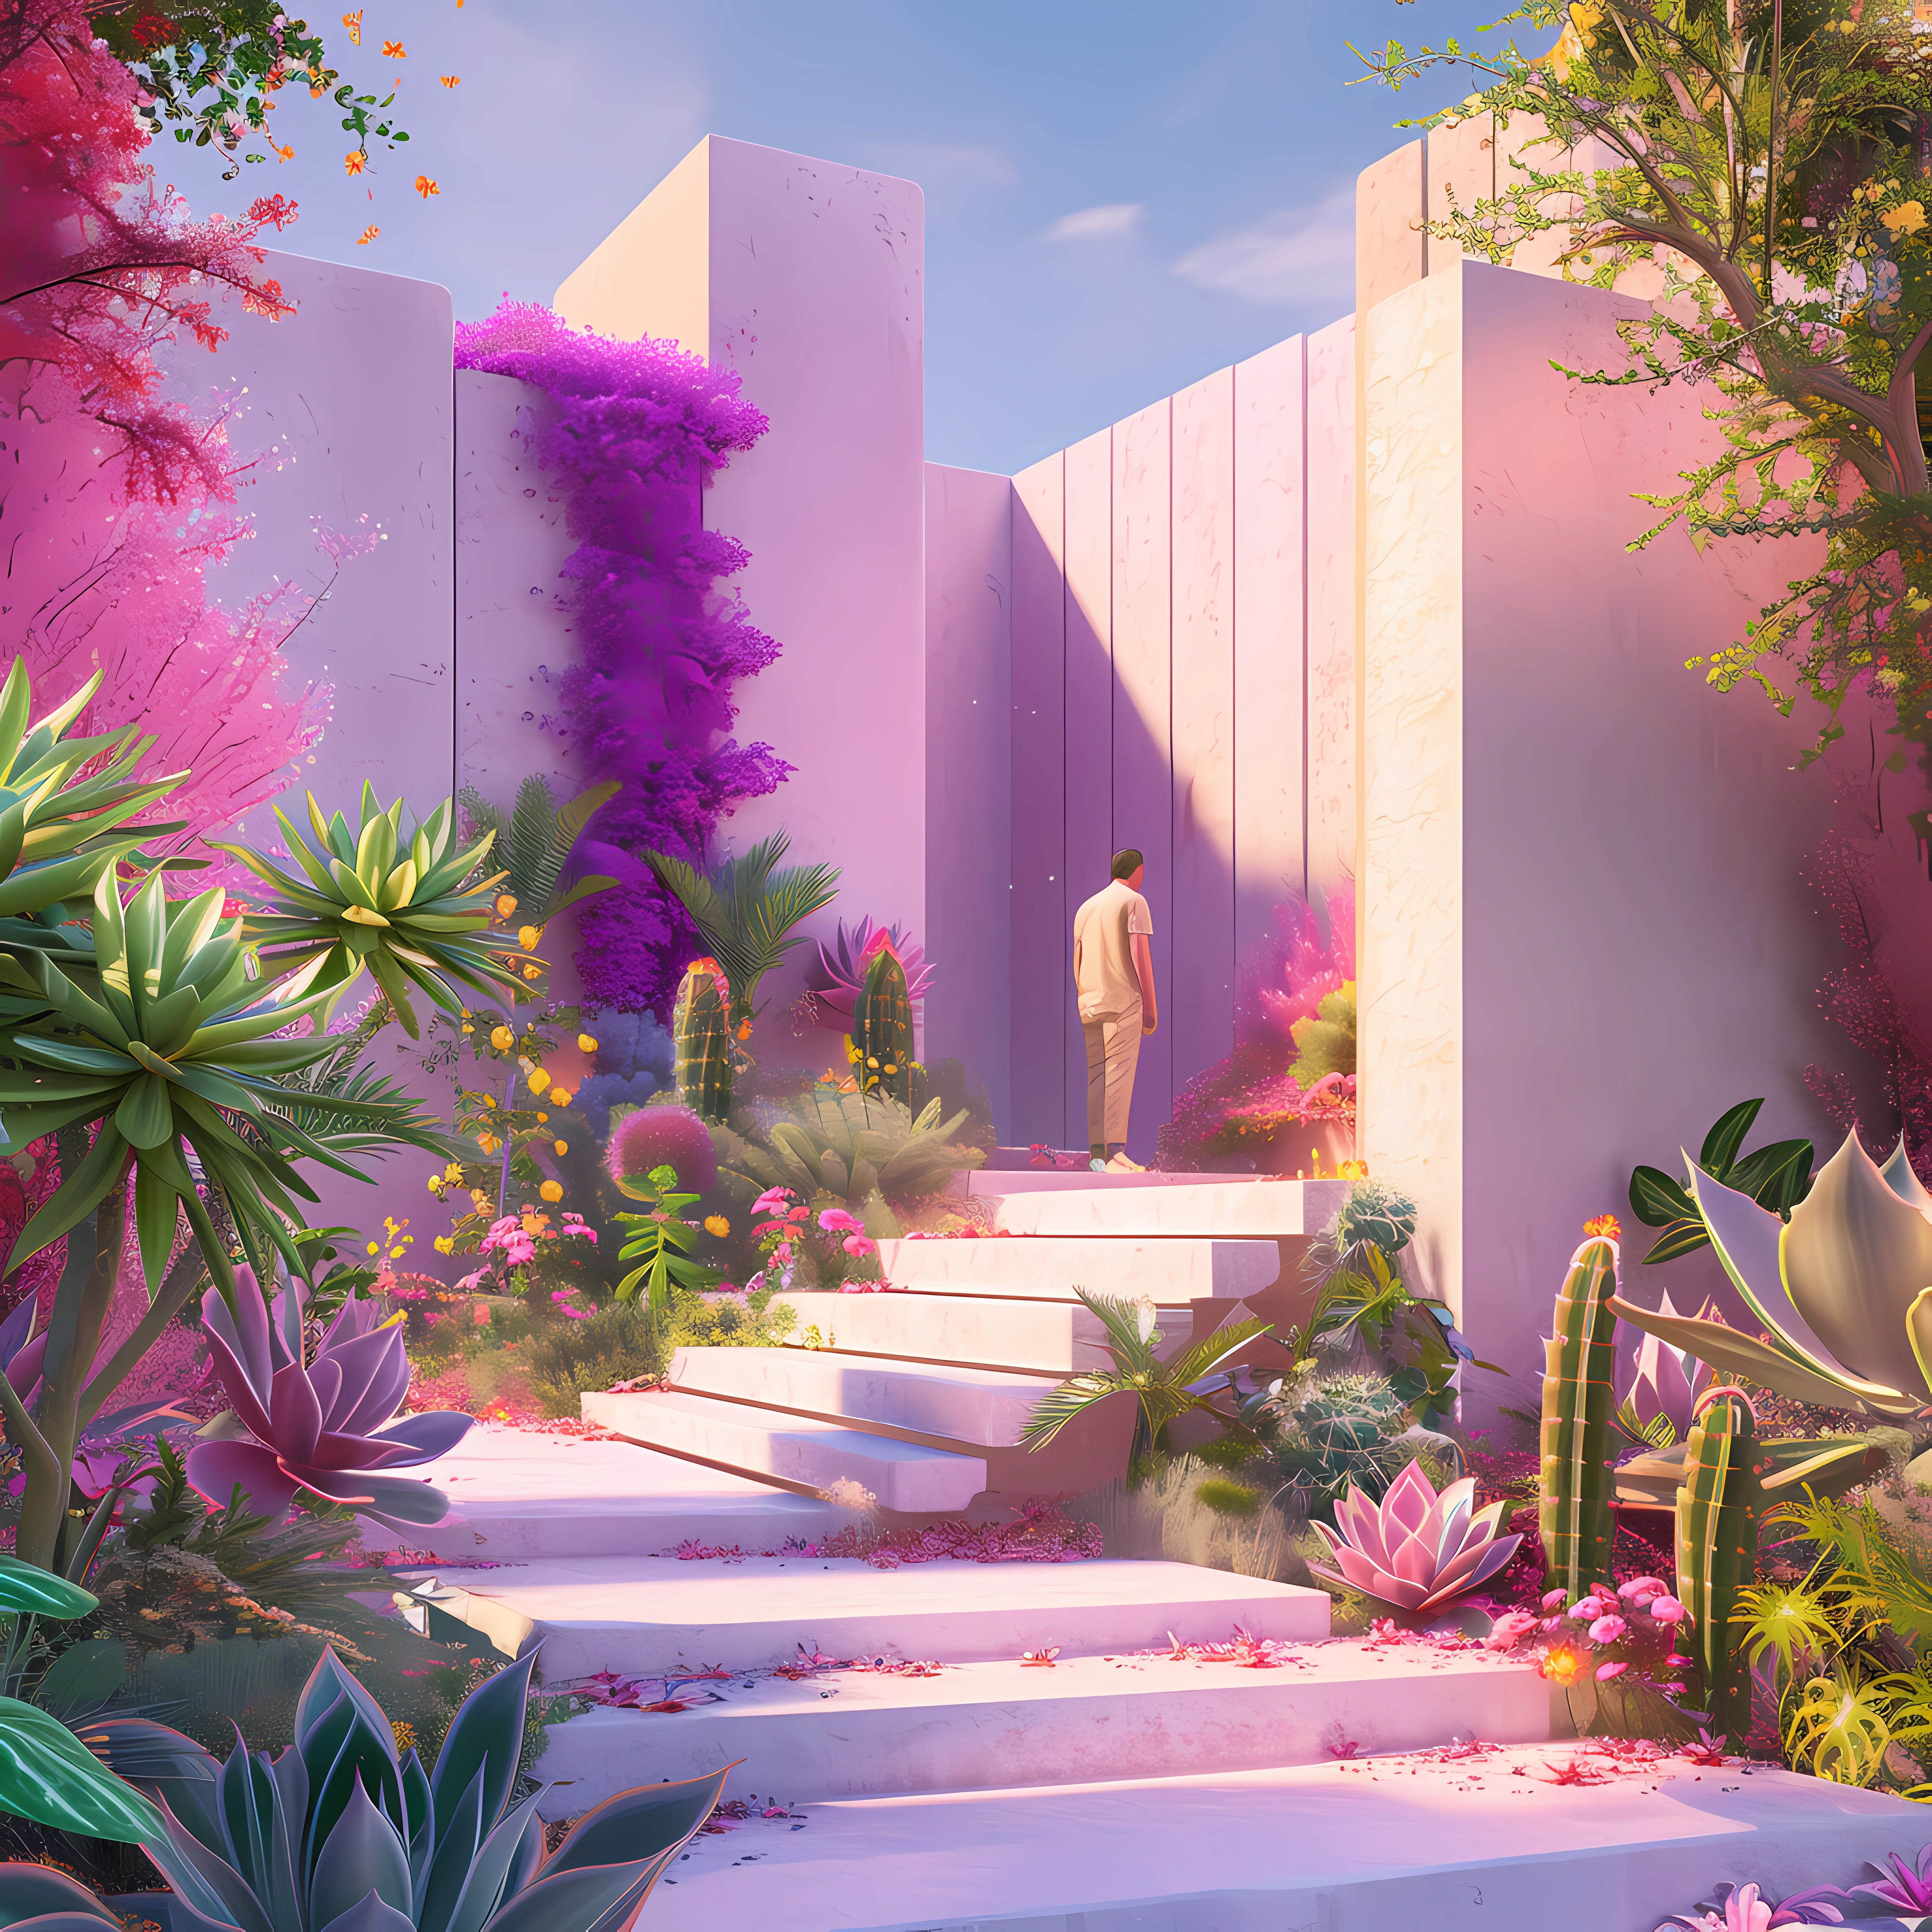 Avatar image of a surreal vaporwave-inspired garden with vibrant purple foliage and modern geometric structures, perfect for gardening and psychedelic art enthusiasts.